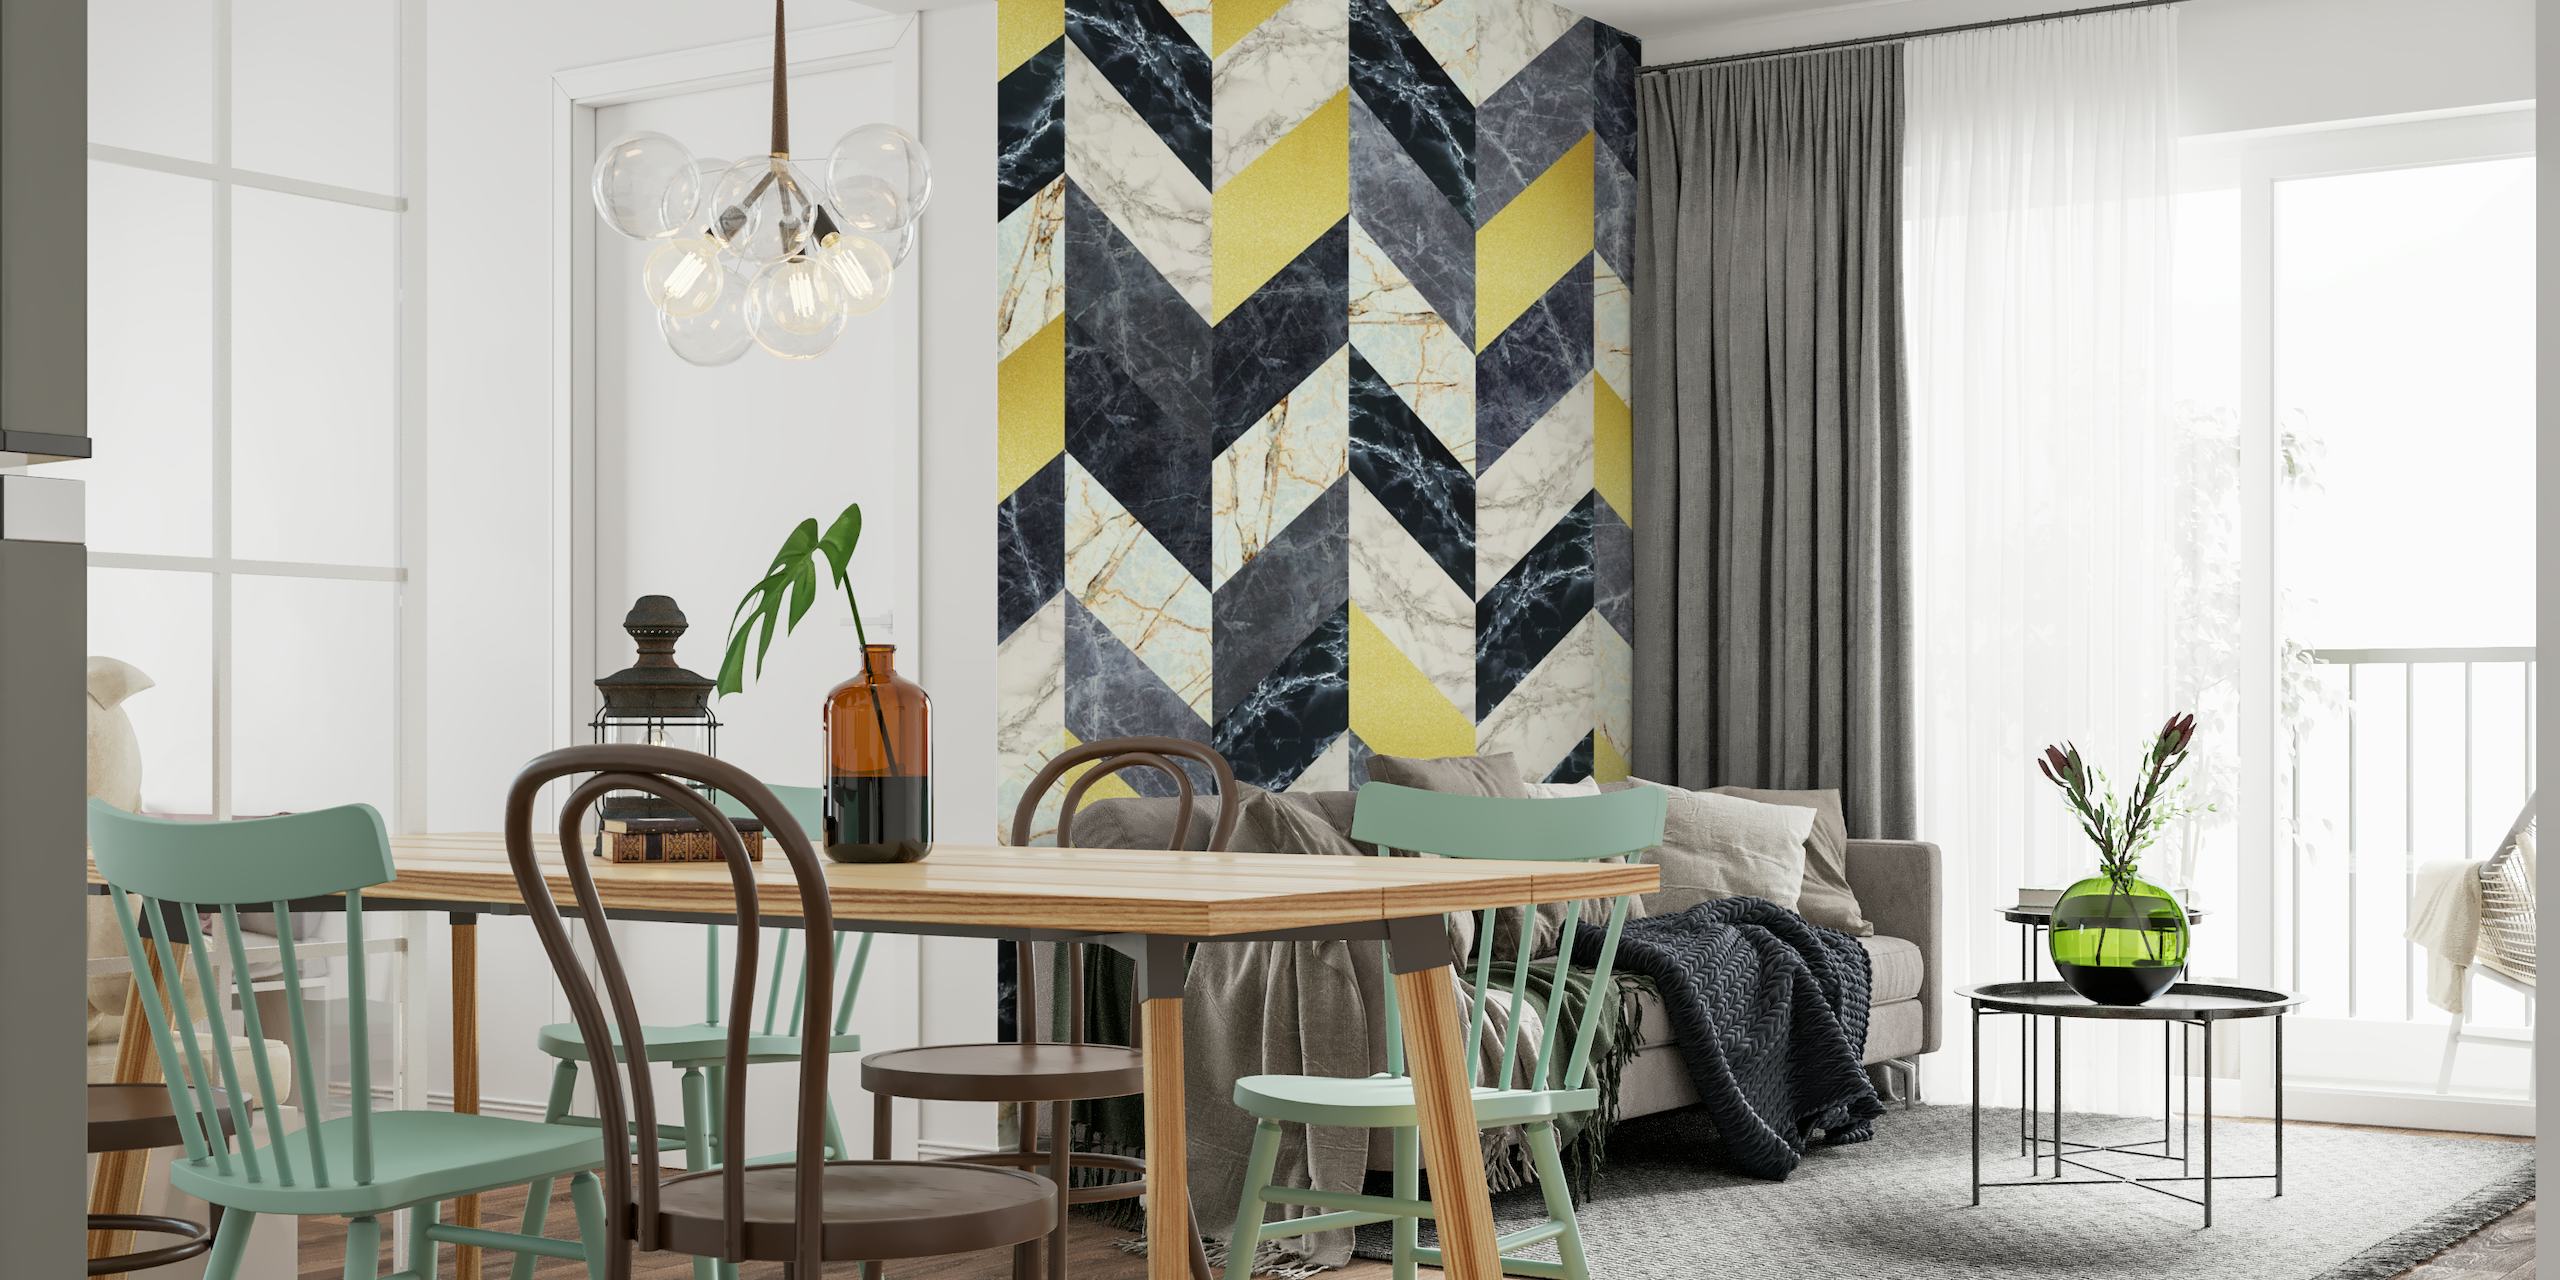 Colored Pattern II geometric zigzag wall mural with gold, silver, and charcoal shades on happywall.com